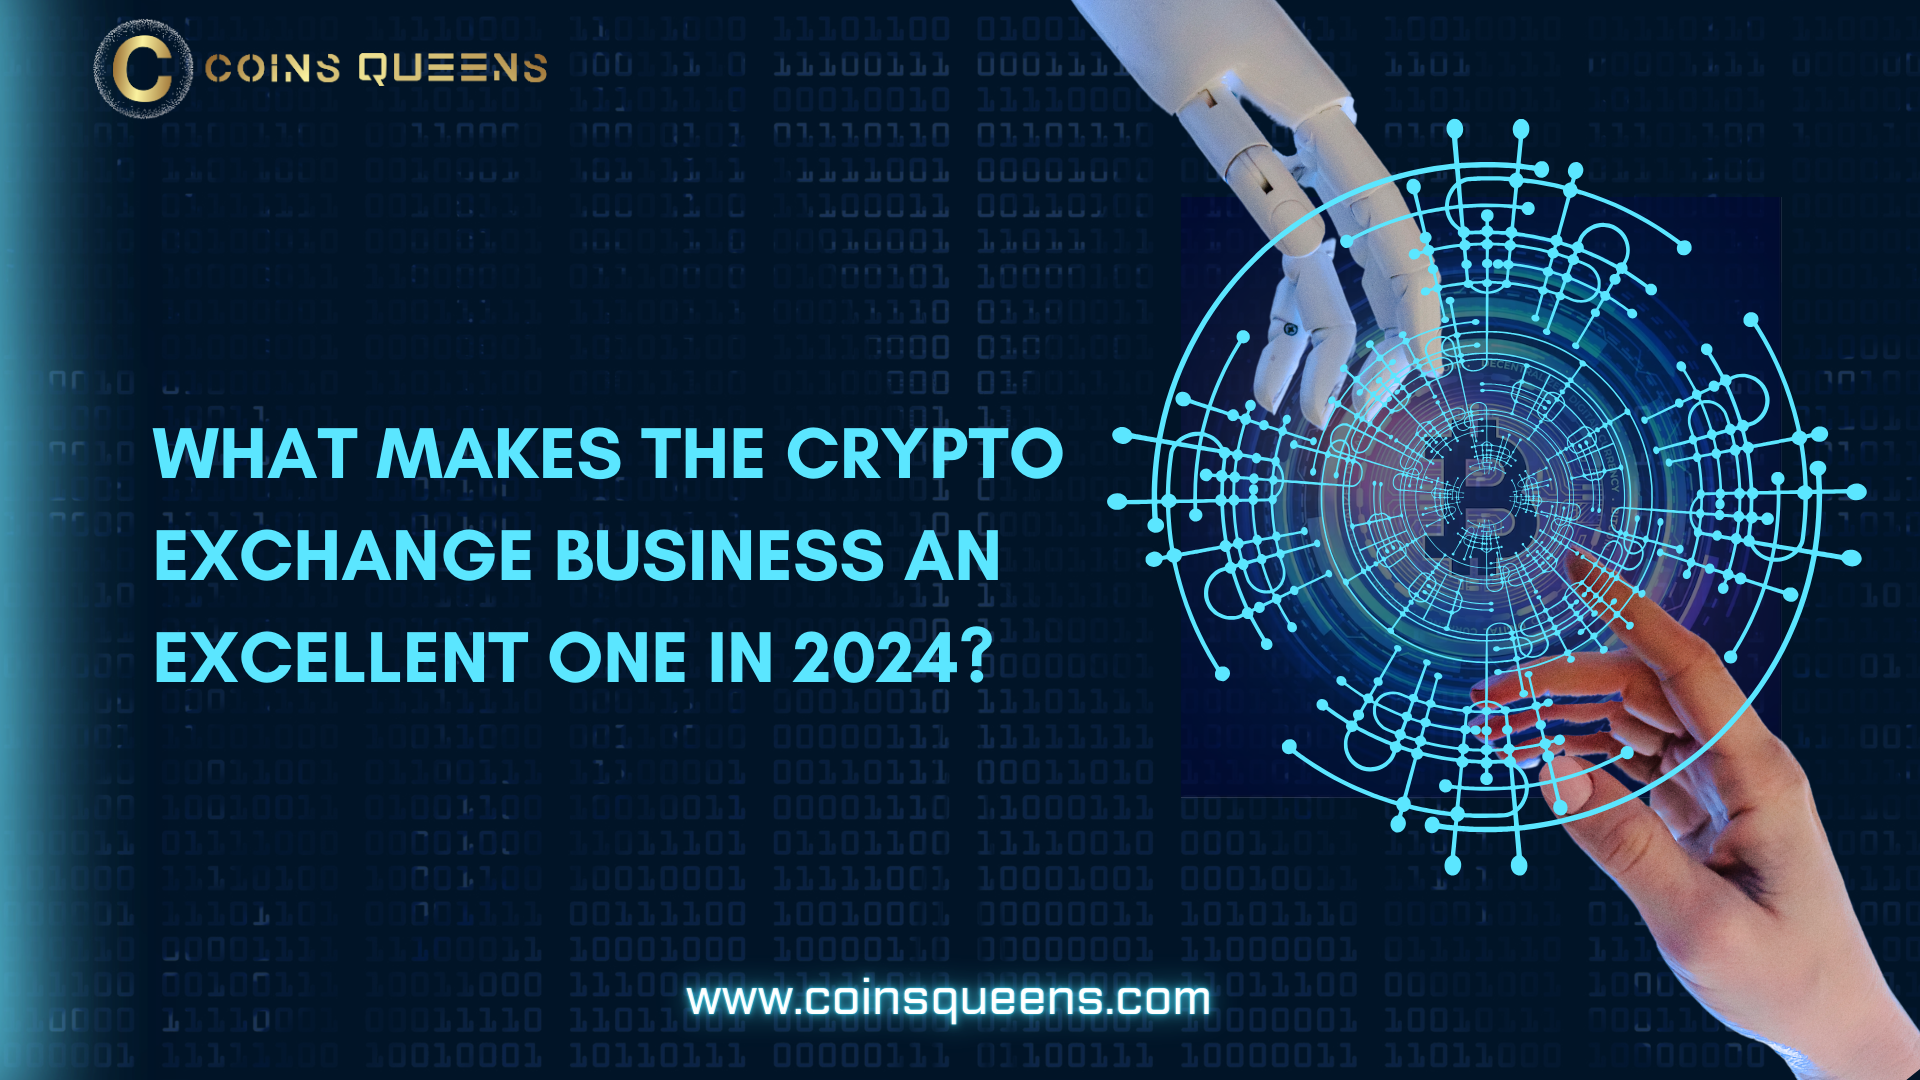 Pos
{#9 COINS QU==NS

WHAT MAKES THE CRYPTO
EXCHANGE BUSINESS AN
EXCELLENT ONE IN 20247

www.coinsqueens.com